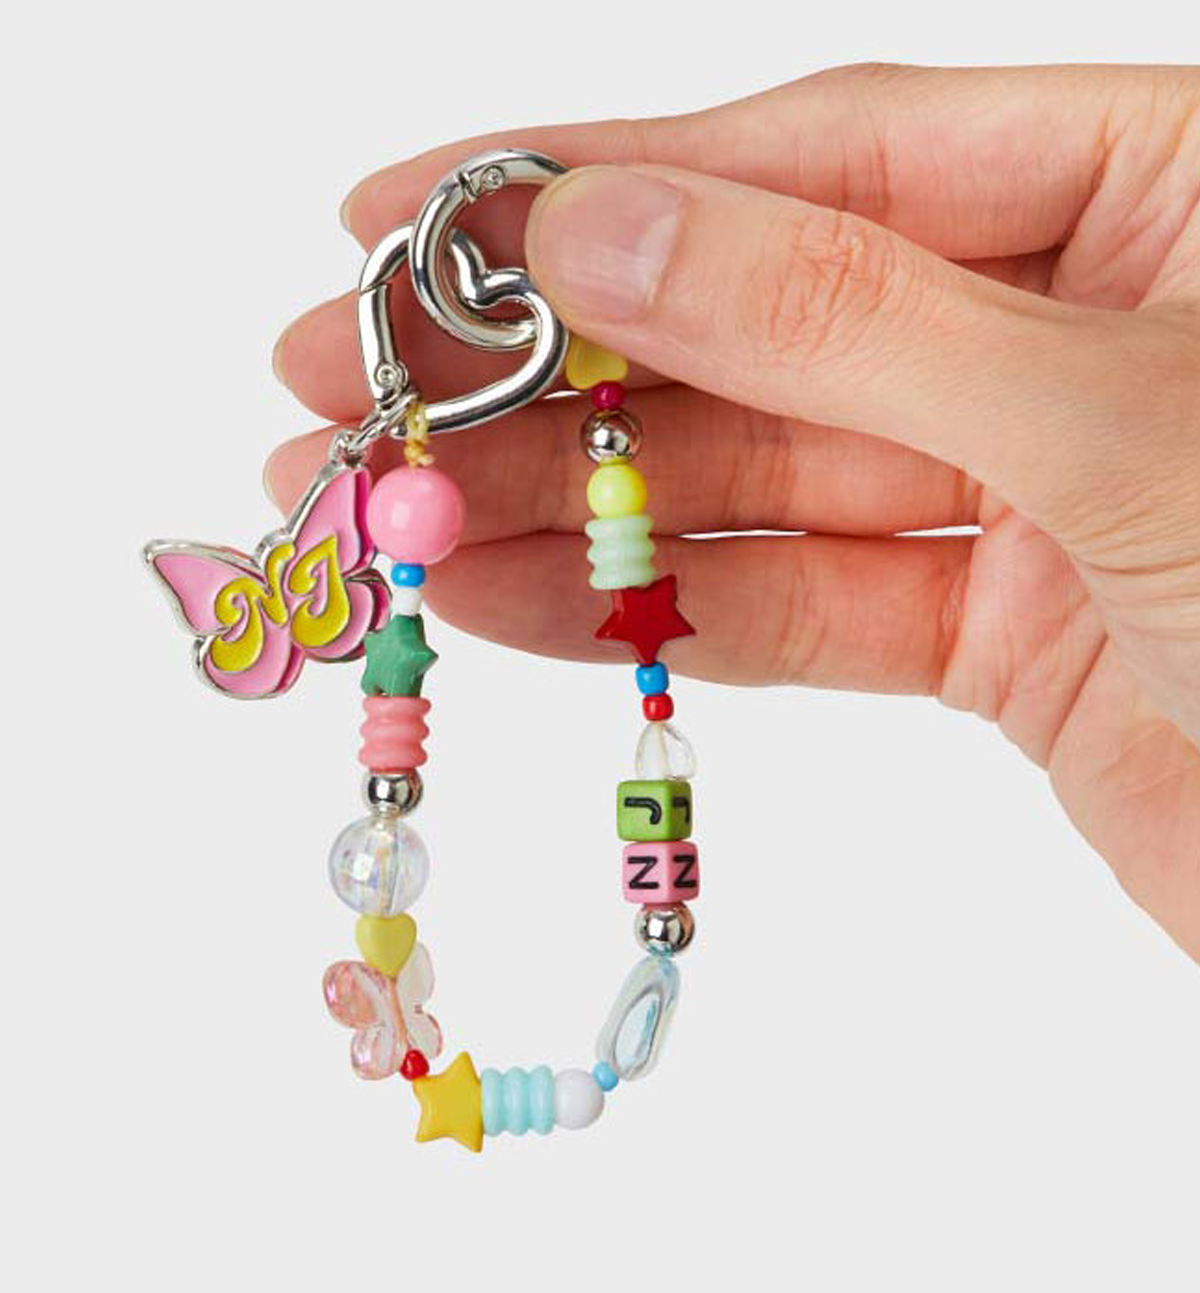 NewJeans Get Up Beads Charm Keyring [Limited Edition]